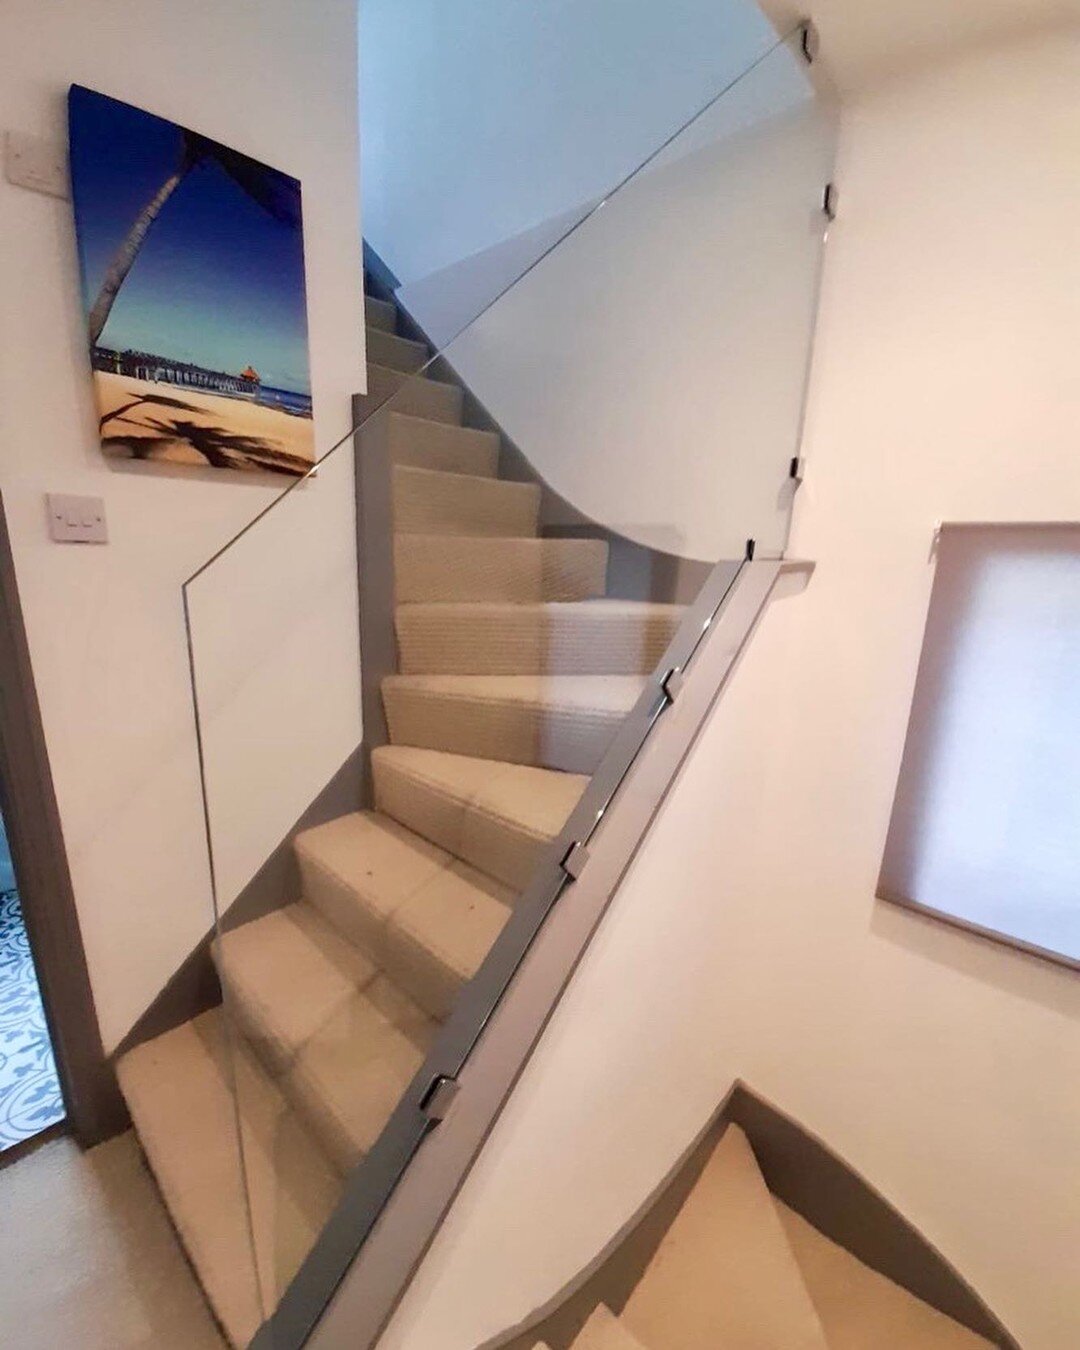 &bull;Frameless Balustrade&bull;

Check out our latest 10mm clear toughened bespoke shape, frameless balustrade project; when our client approached us they knew what they wanted but were unsure on how it would look.

Our team loves designing and help